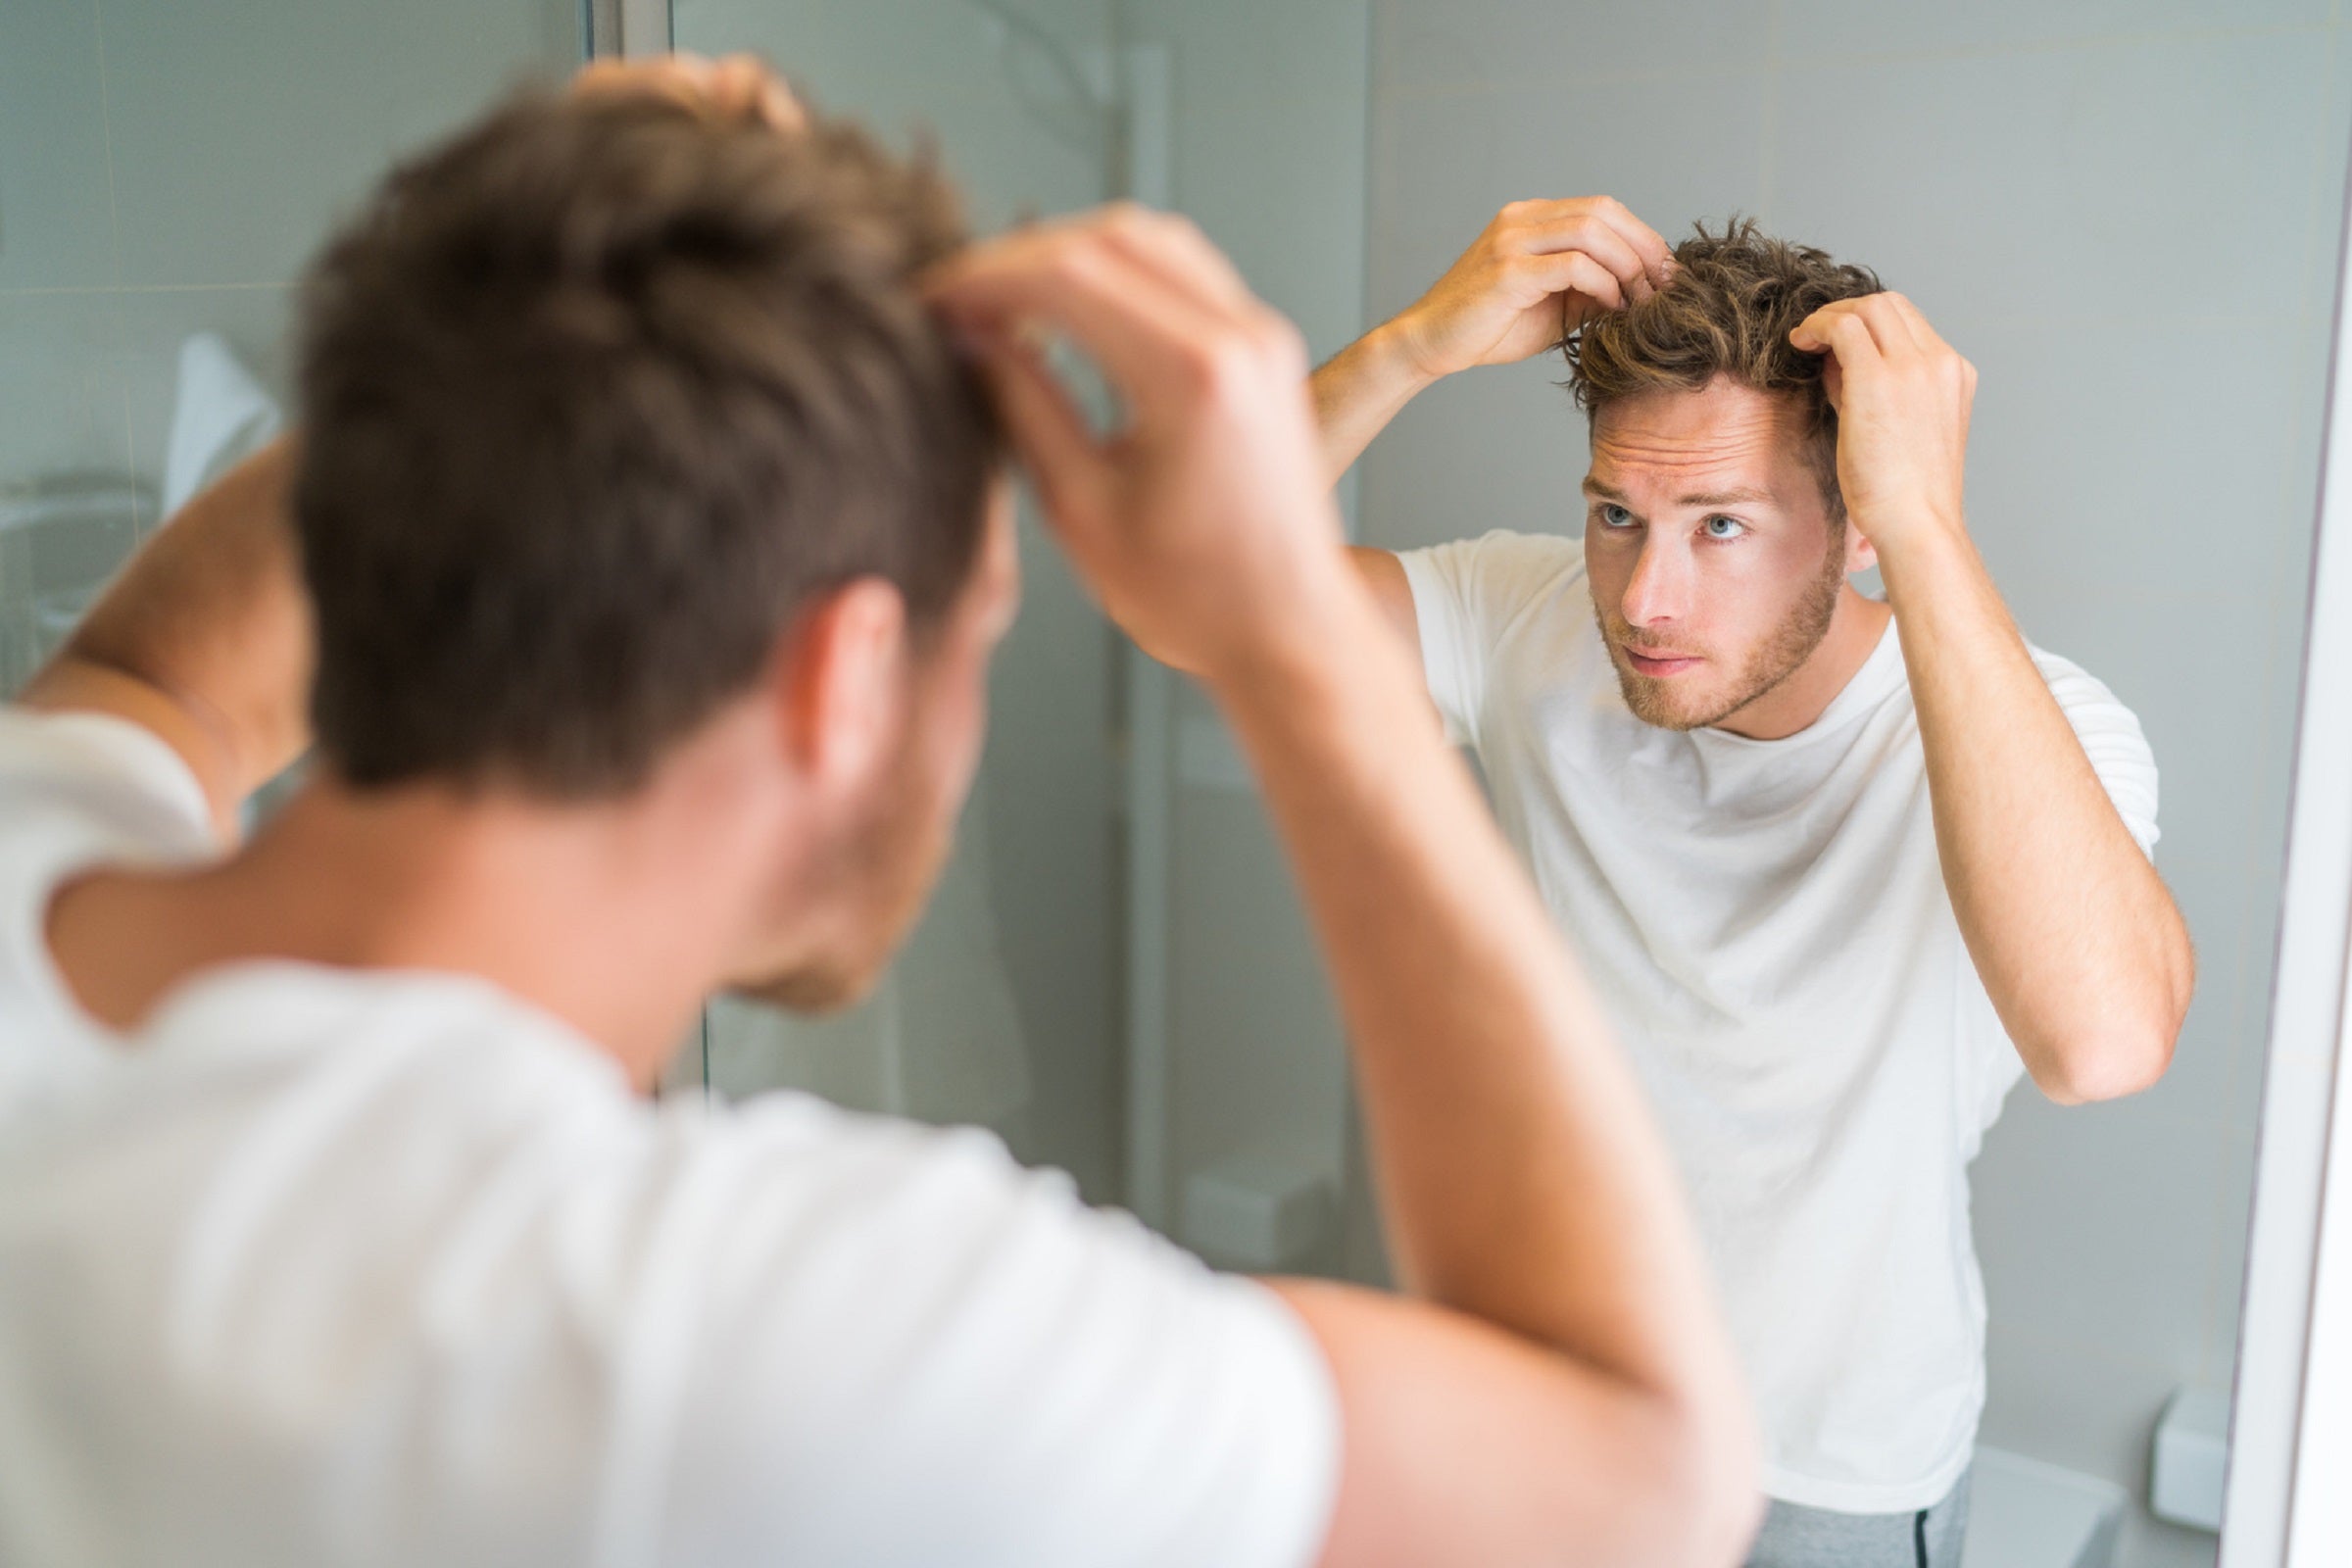 A Clean Scalp is important for Normal Healthy Hair Growth